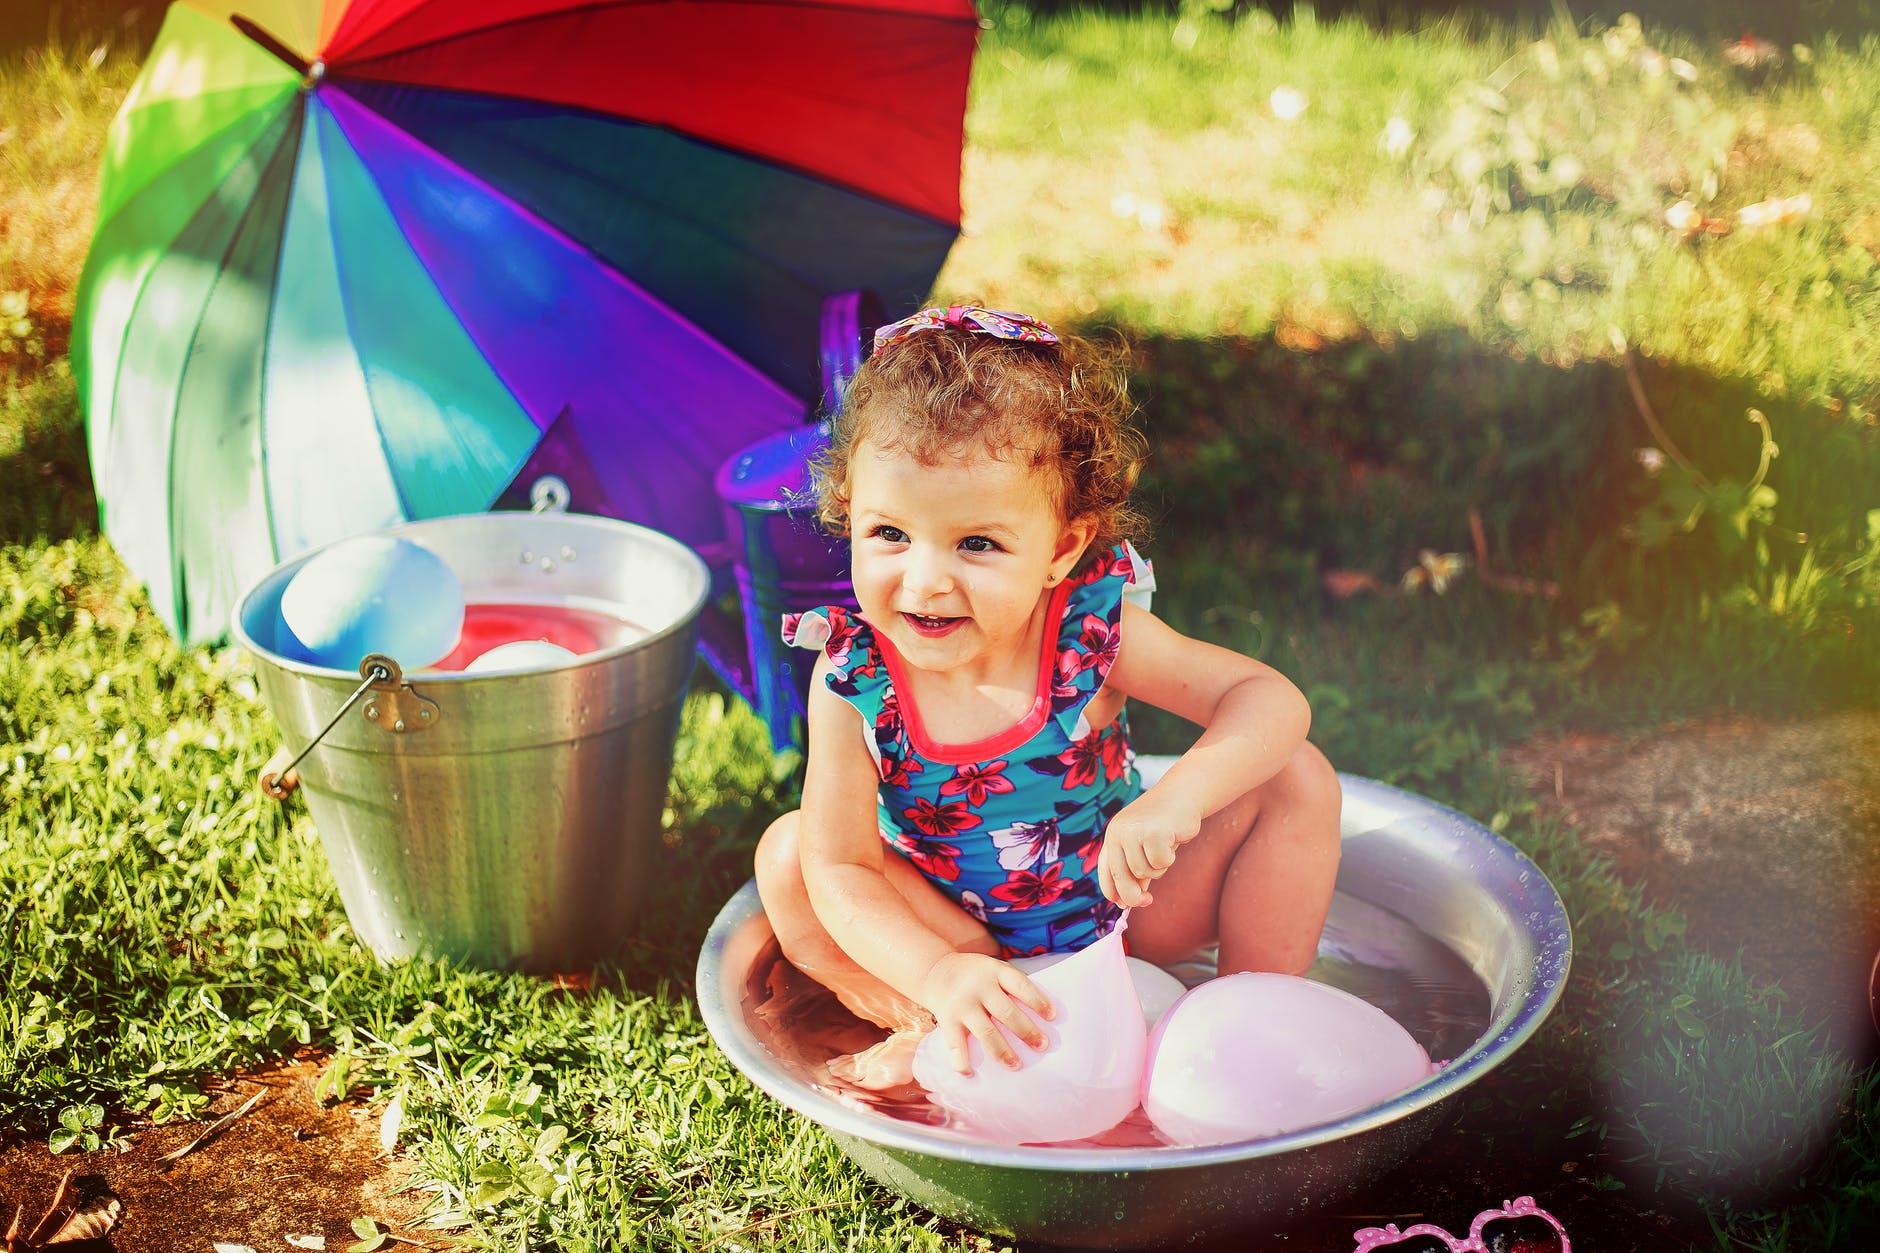 smiling girl sitting on gray stainless steel basin playing with pink balloons